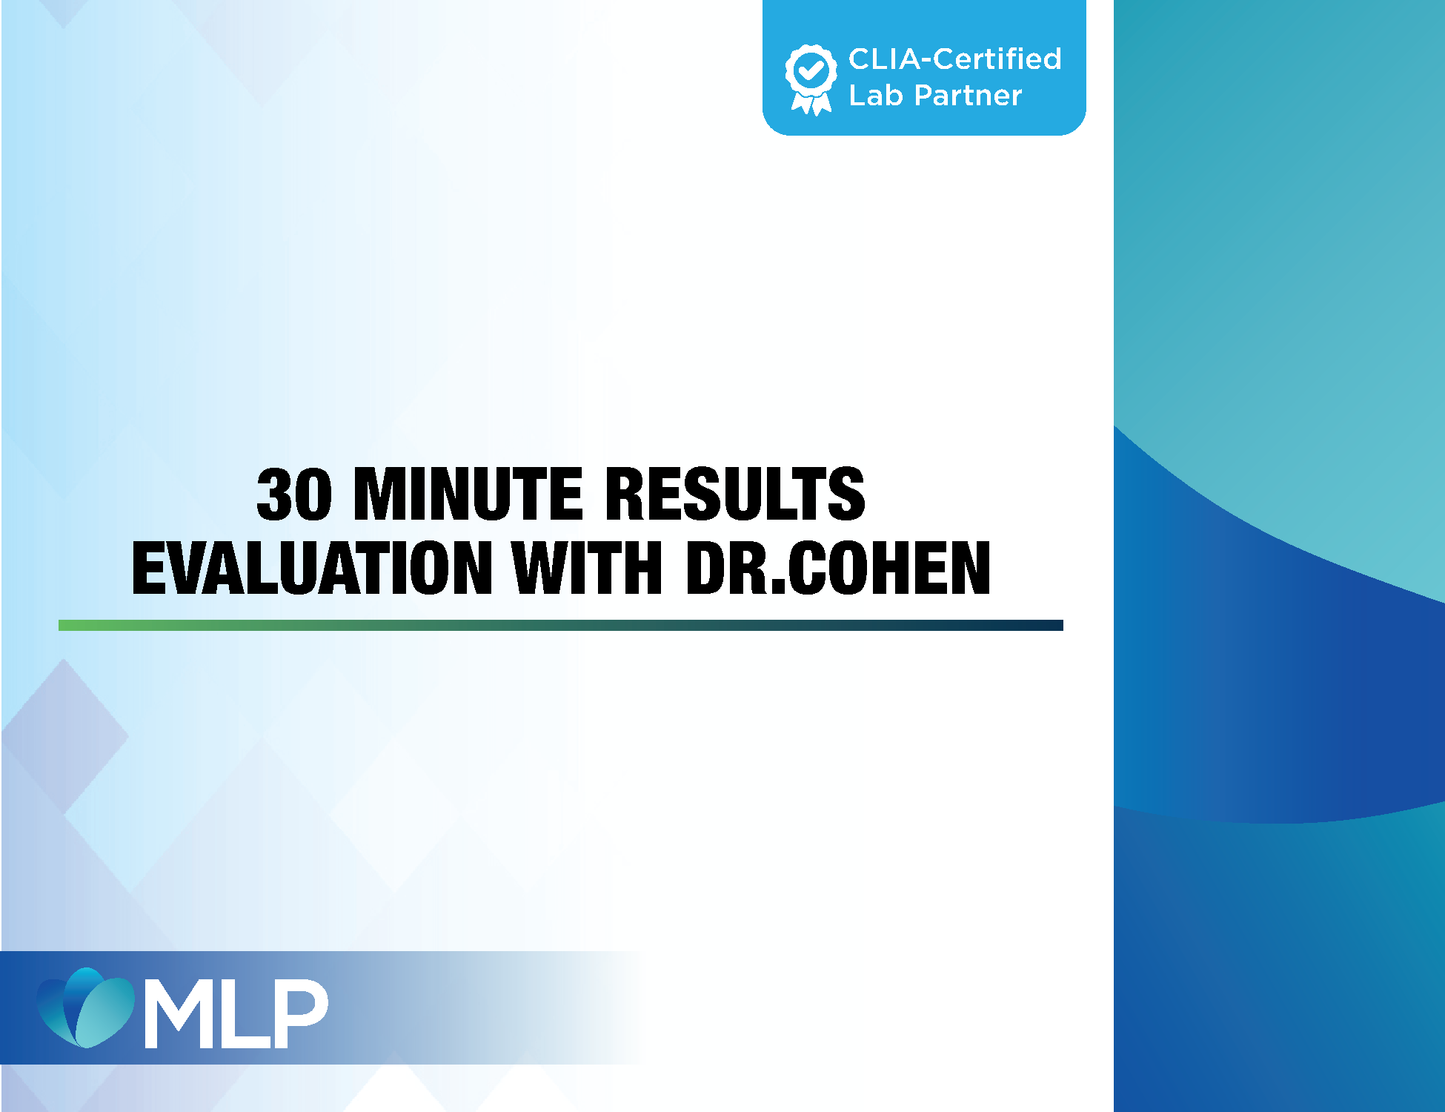 30 Minute Results Evaluation with Dr. Cohen